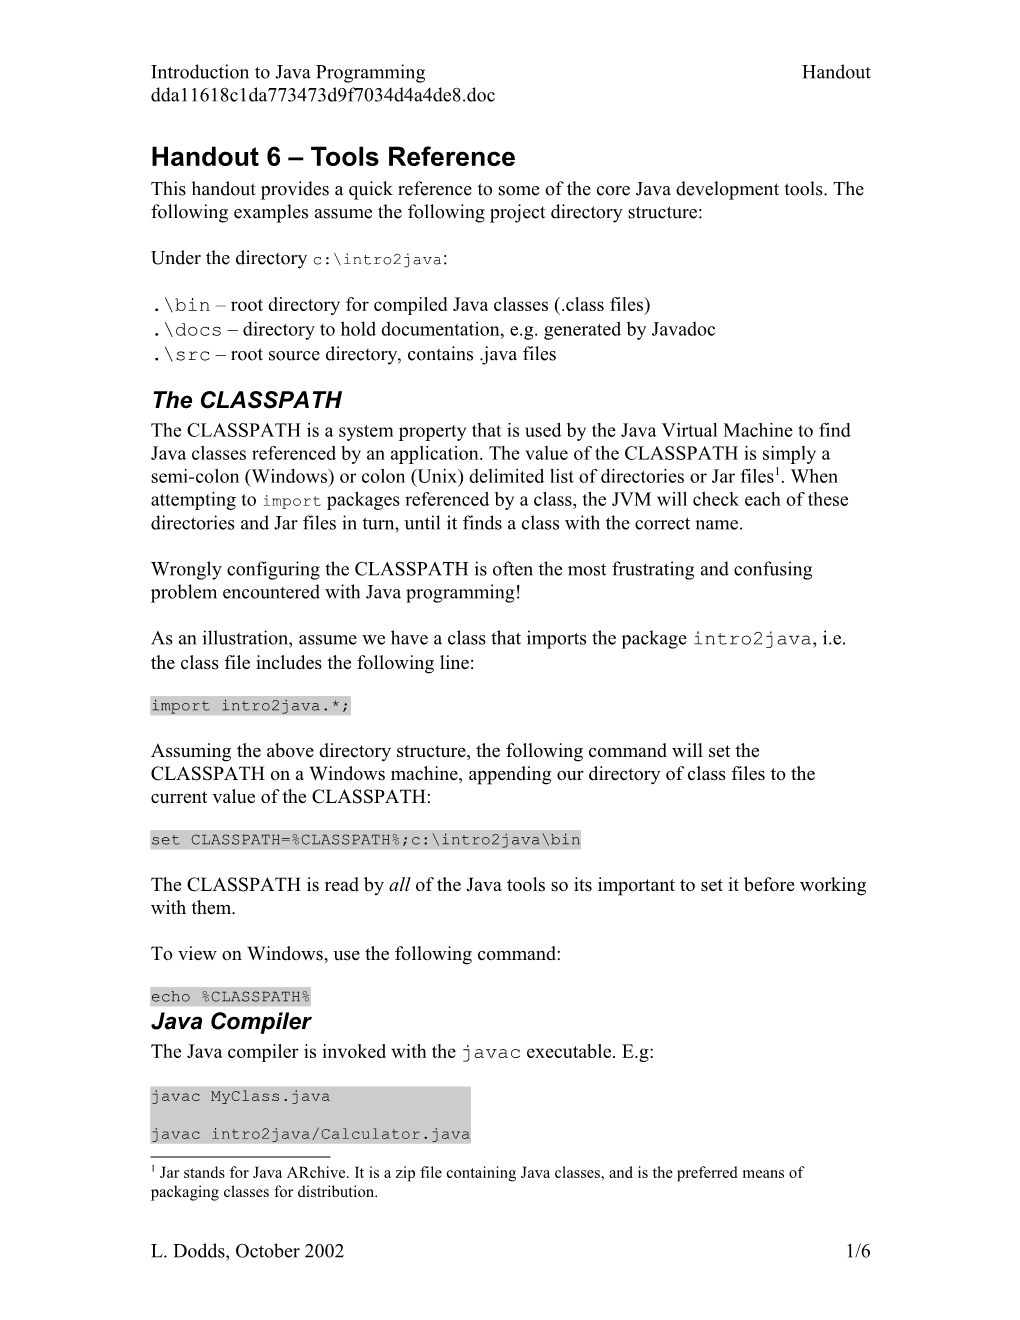 Handout 7 Tools Reference